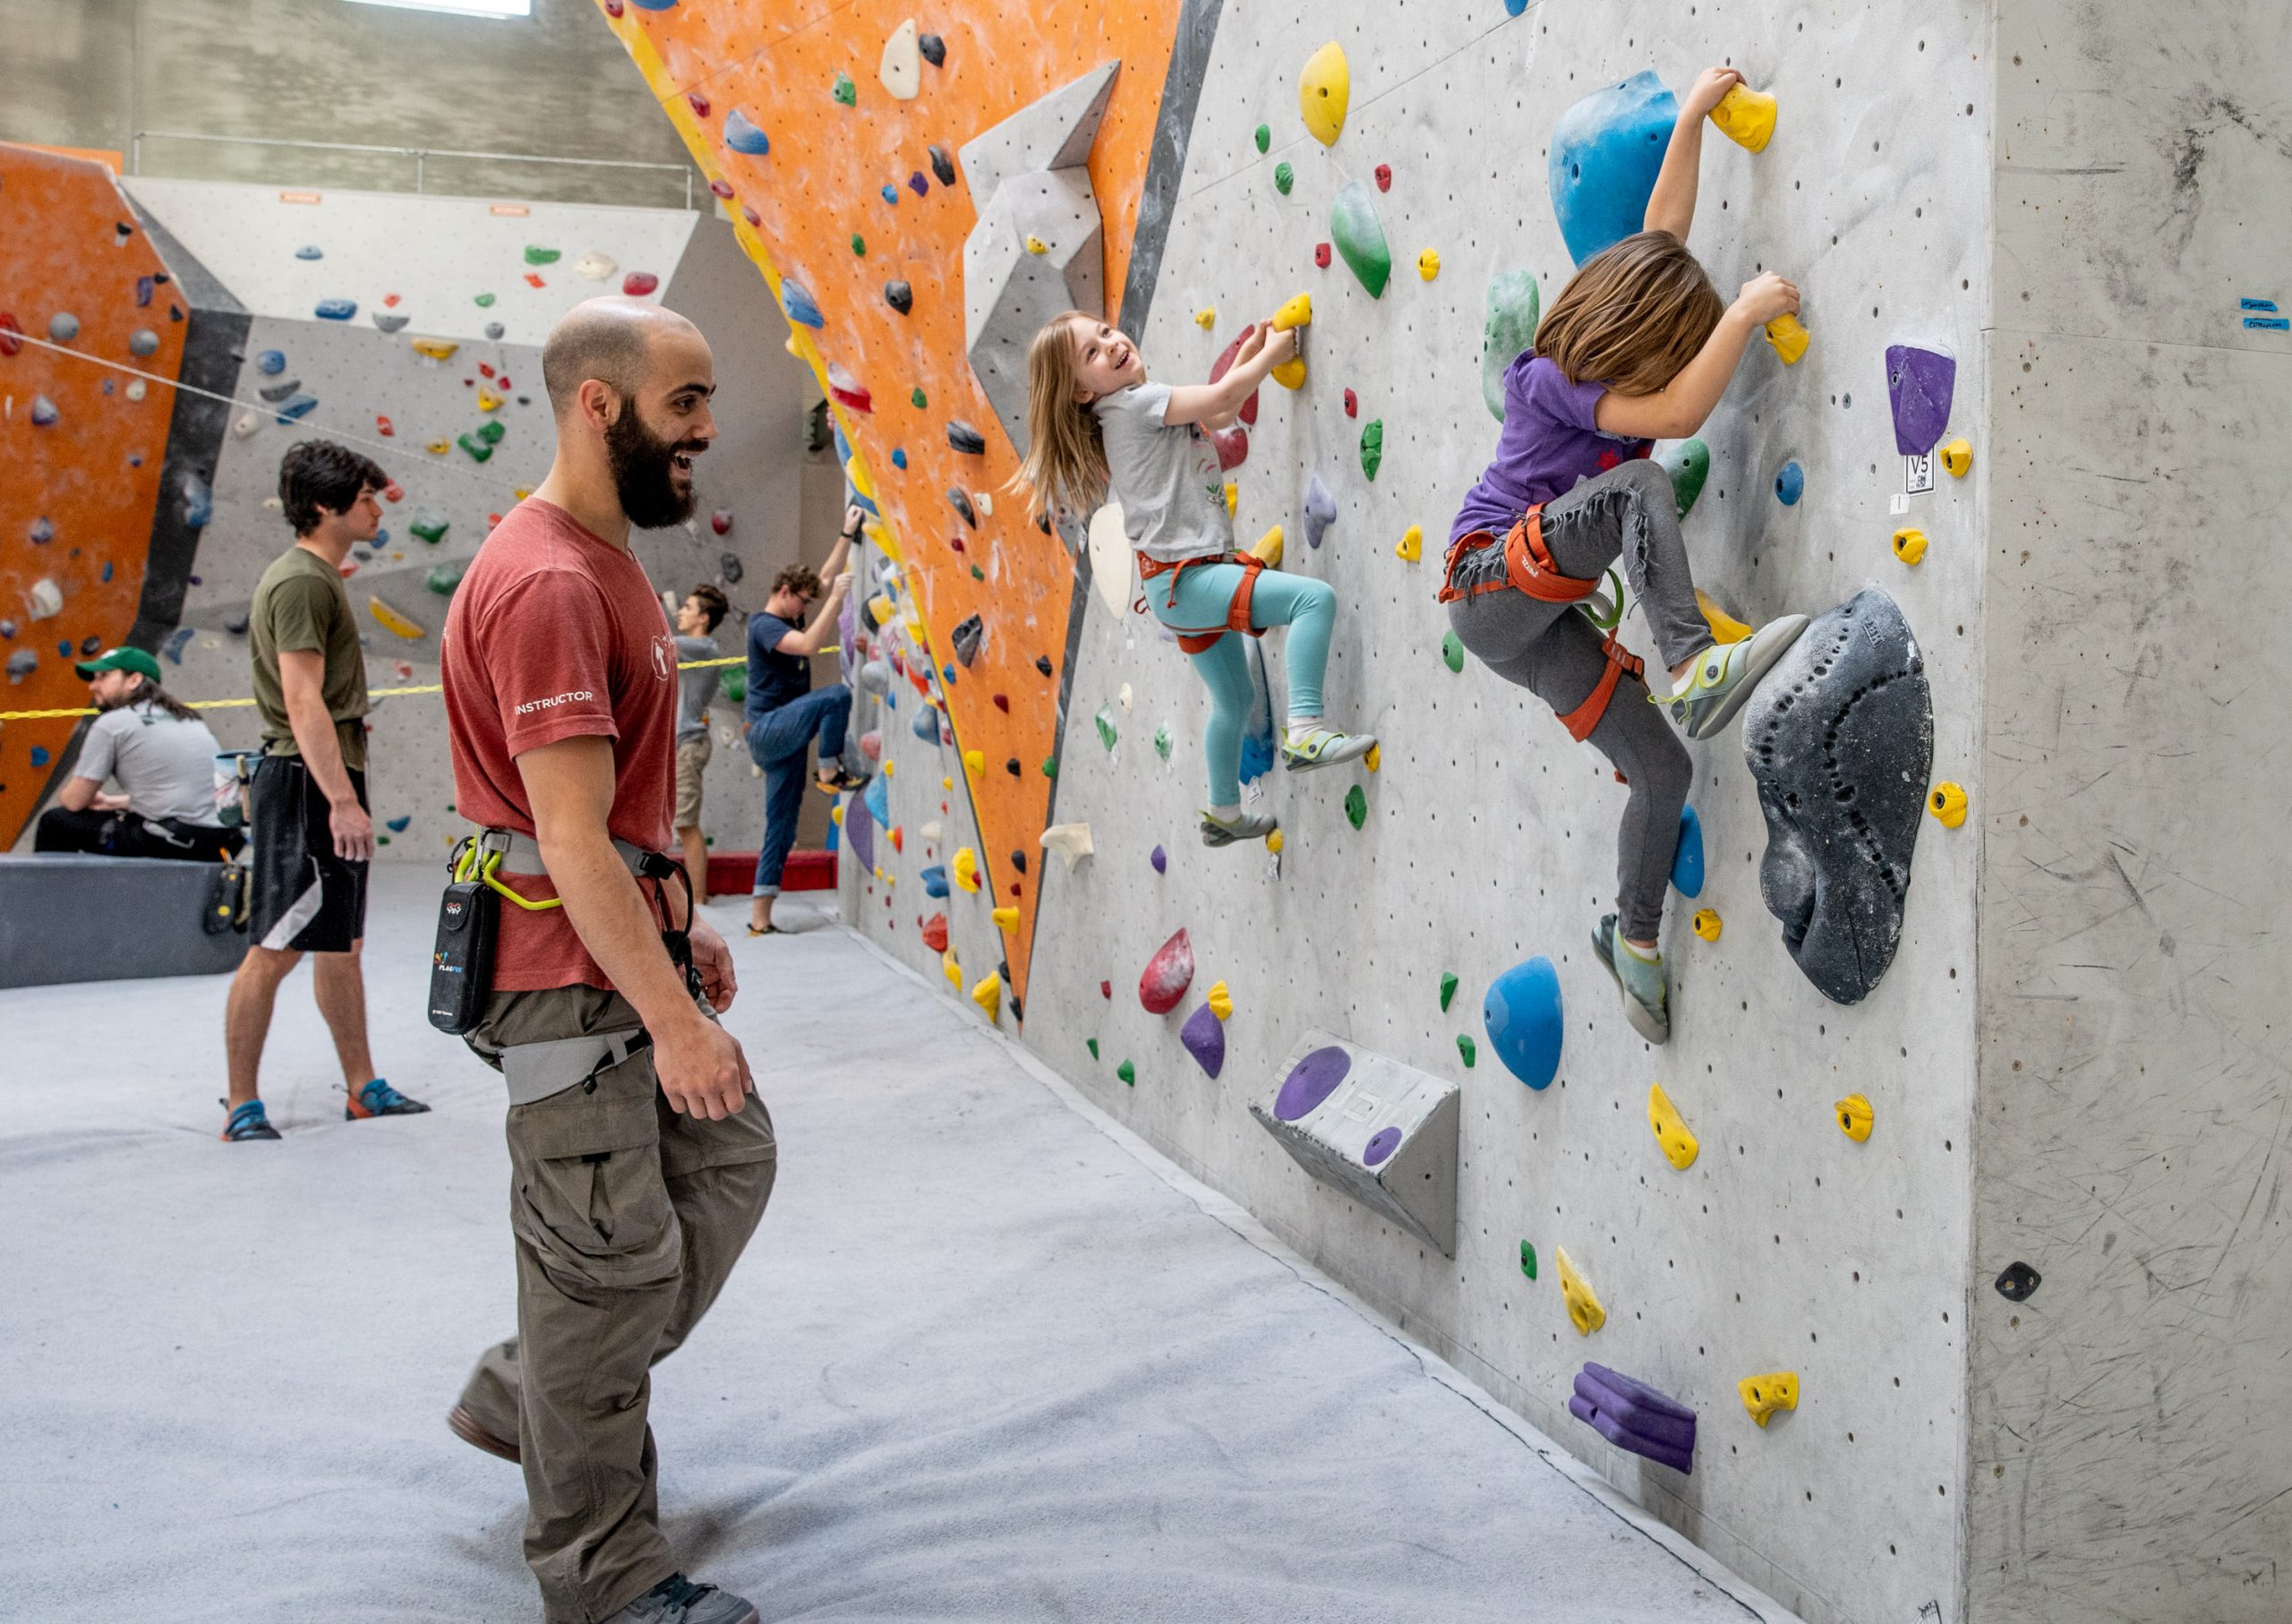 First Ascent Is Now City's Tallest Gym Dedicated to Climbing - Avondale -  Chicago - DNAinfo